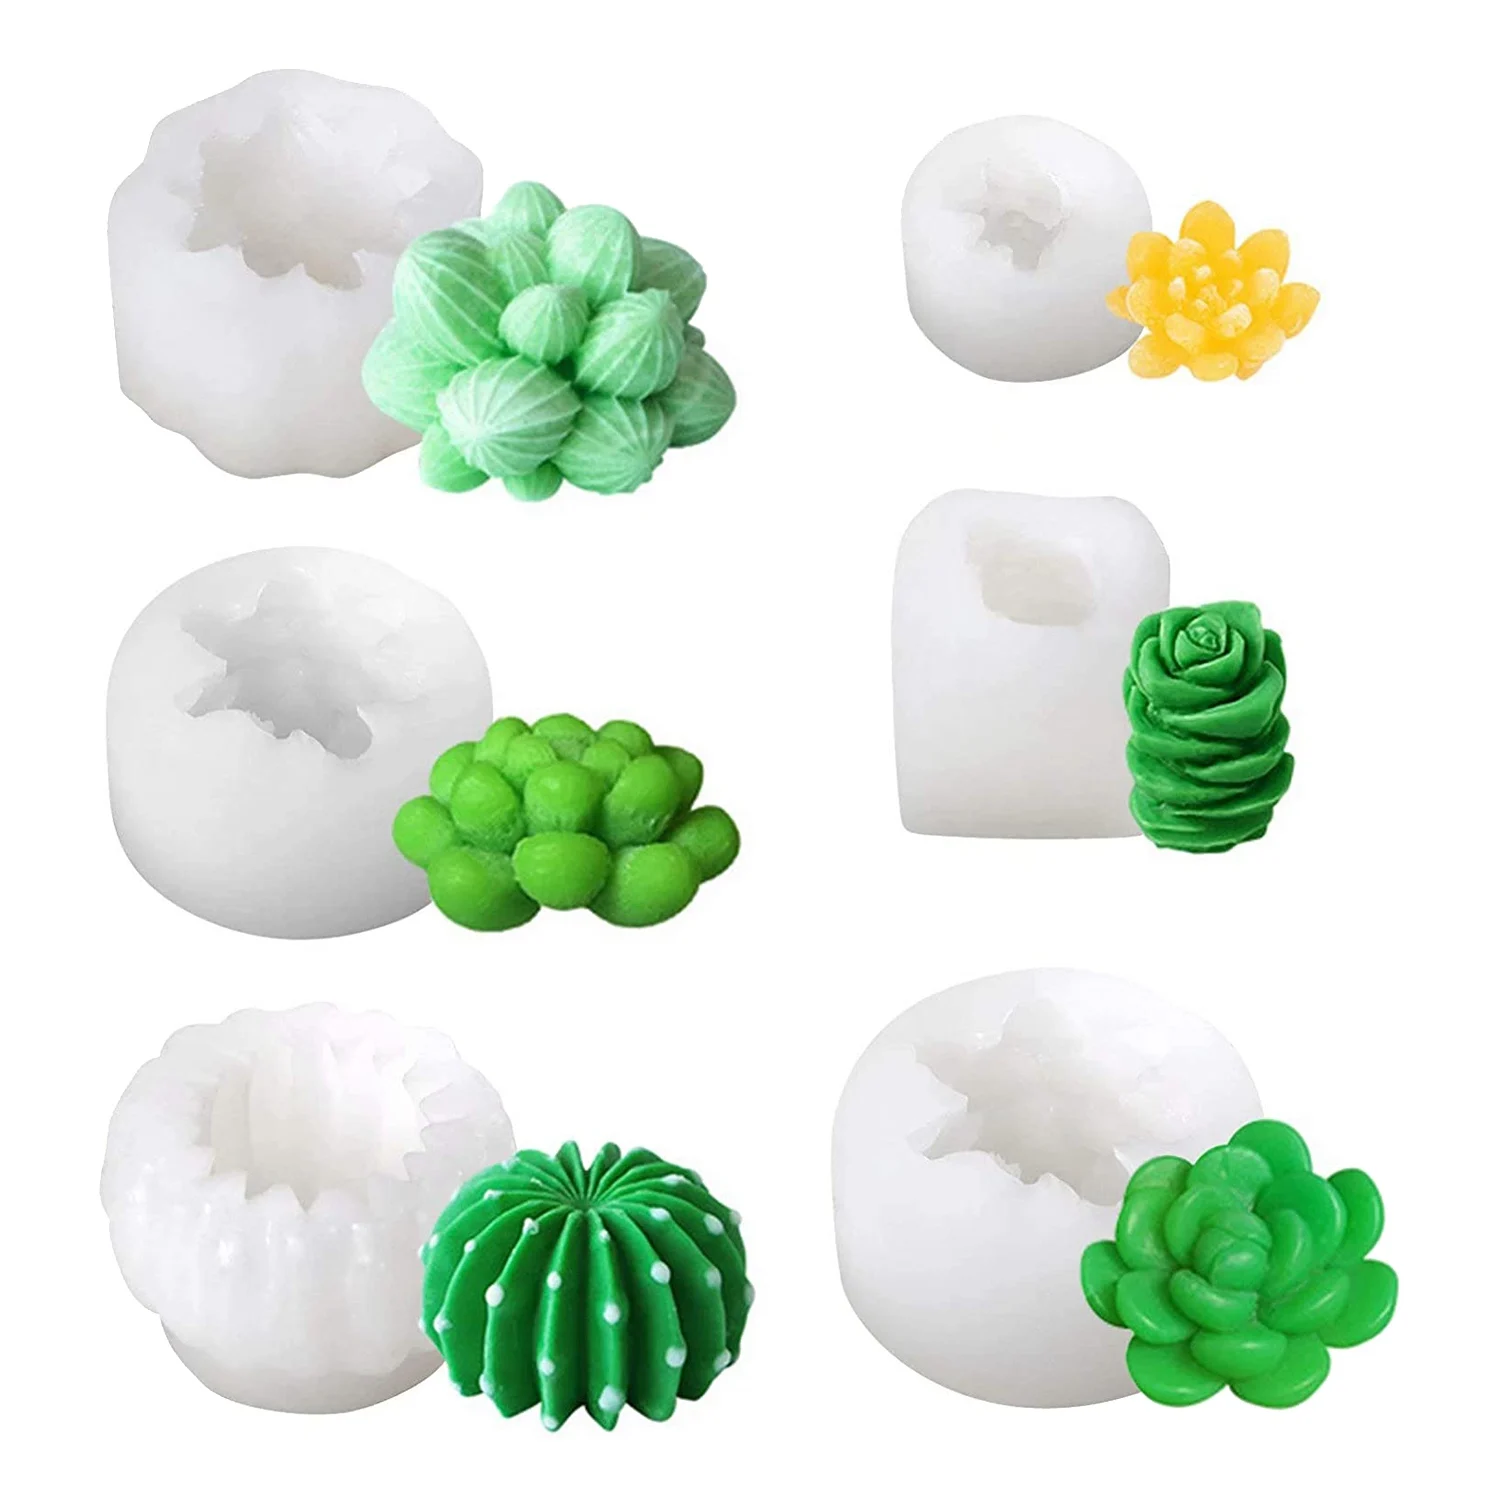 

6 Pack Candle Silicone Molds,Succulent Cactus Plants Resin Casting Mold for Handmade Candle,Epoxy Resin,Polymer Clay,Wax